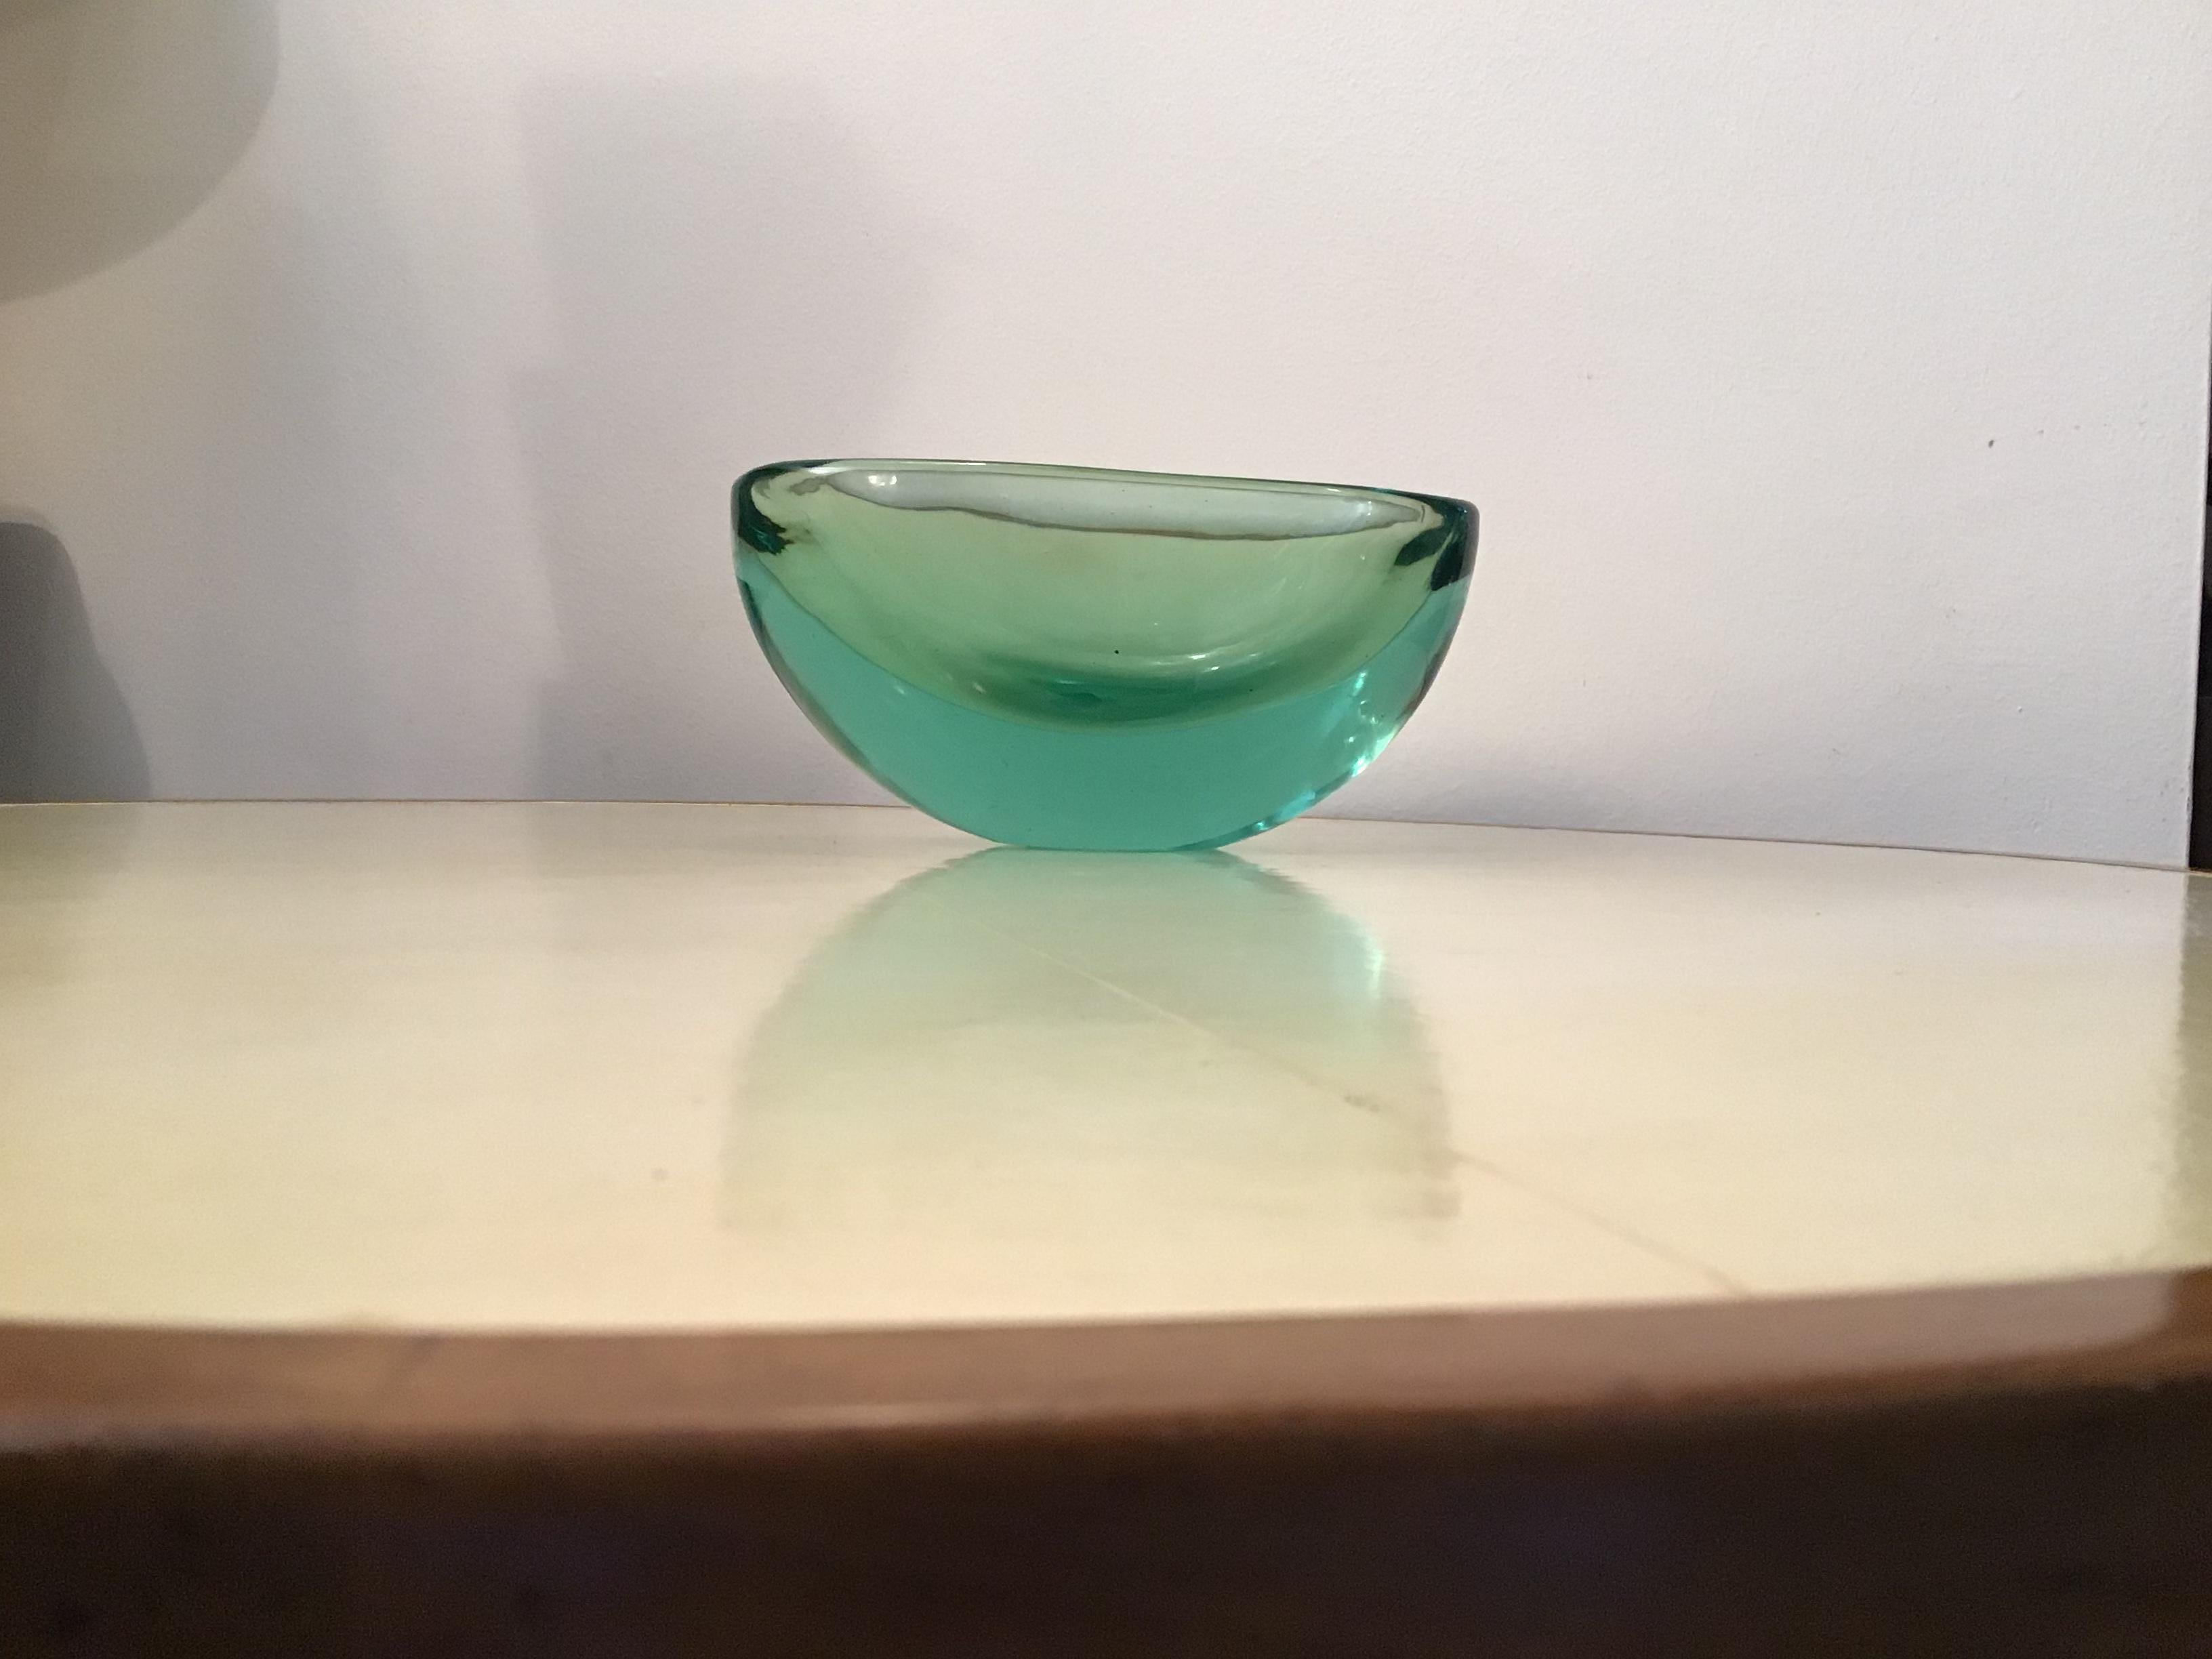 Archimede Seguso Oval Bowl, Green Submerged Glass Centrepiece, 1950 For Sale 7